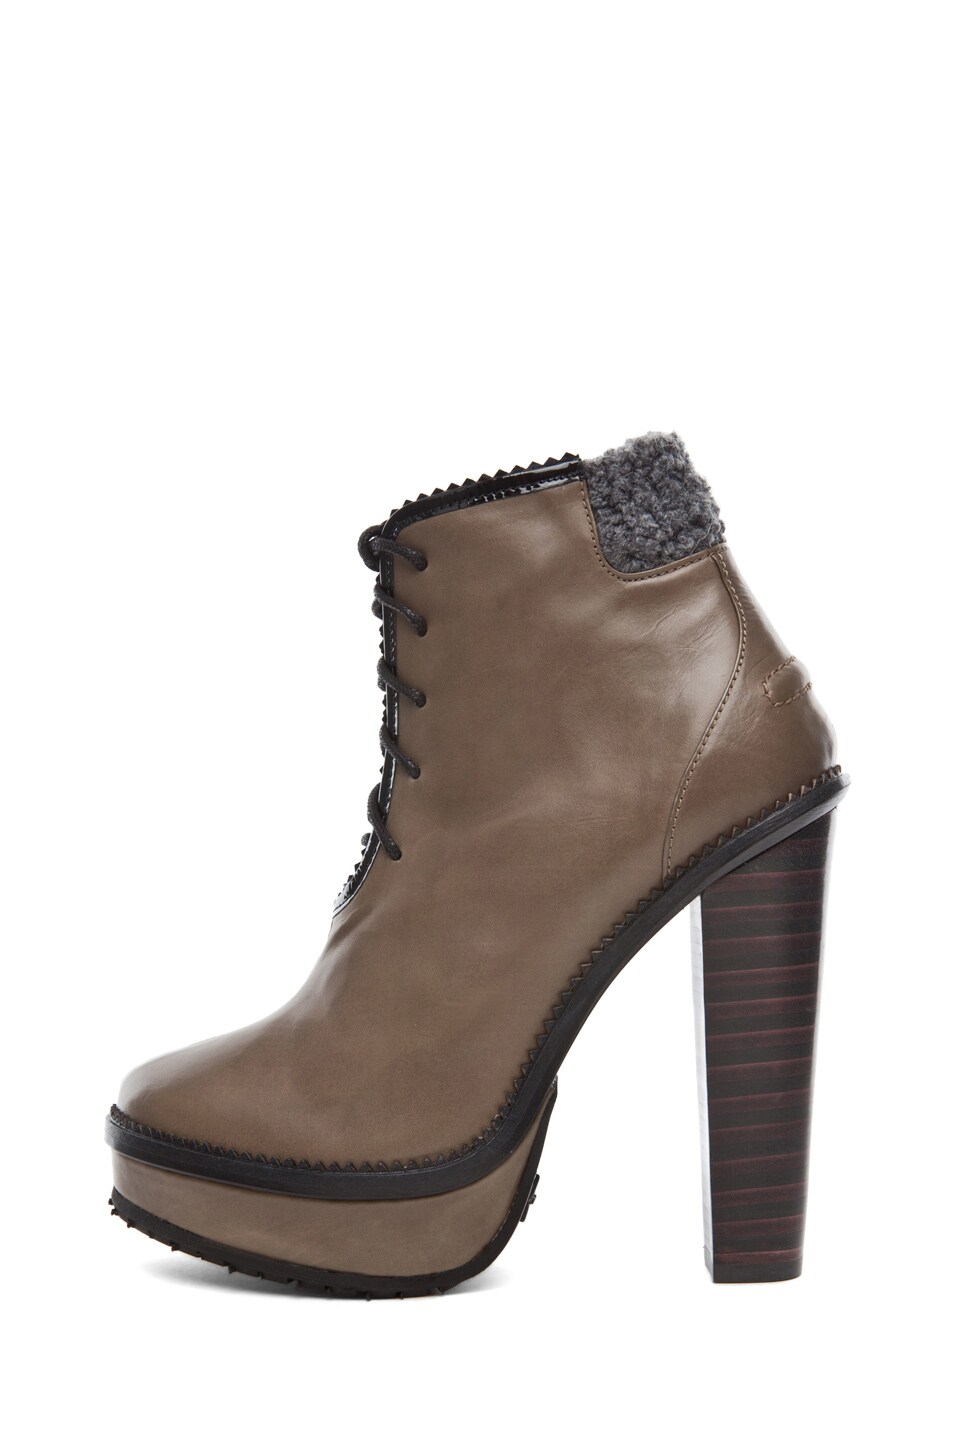 Image 1 of Opening Ceremony Laetitia Lace Up Bootie in Olive